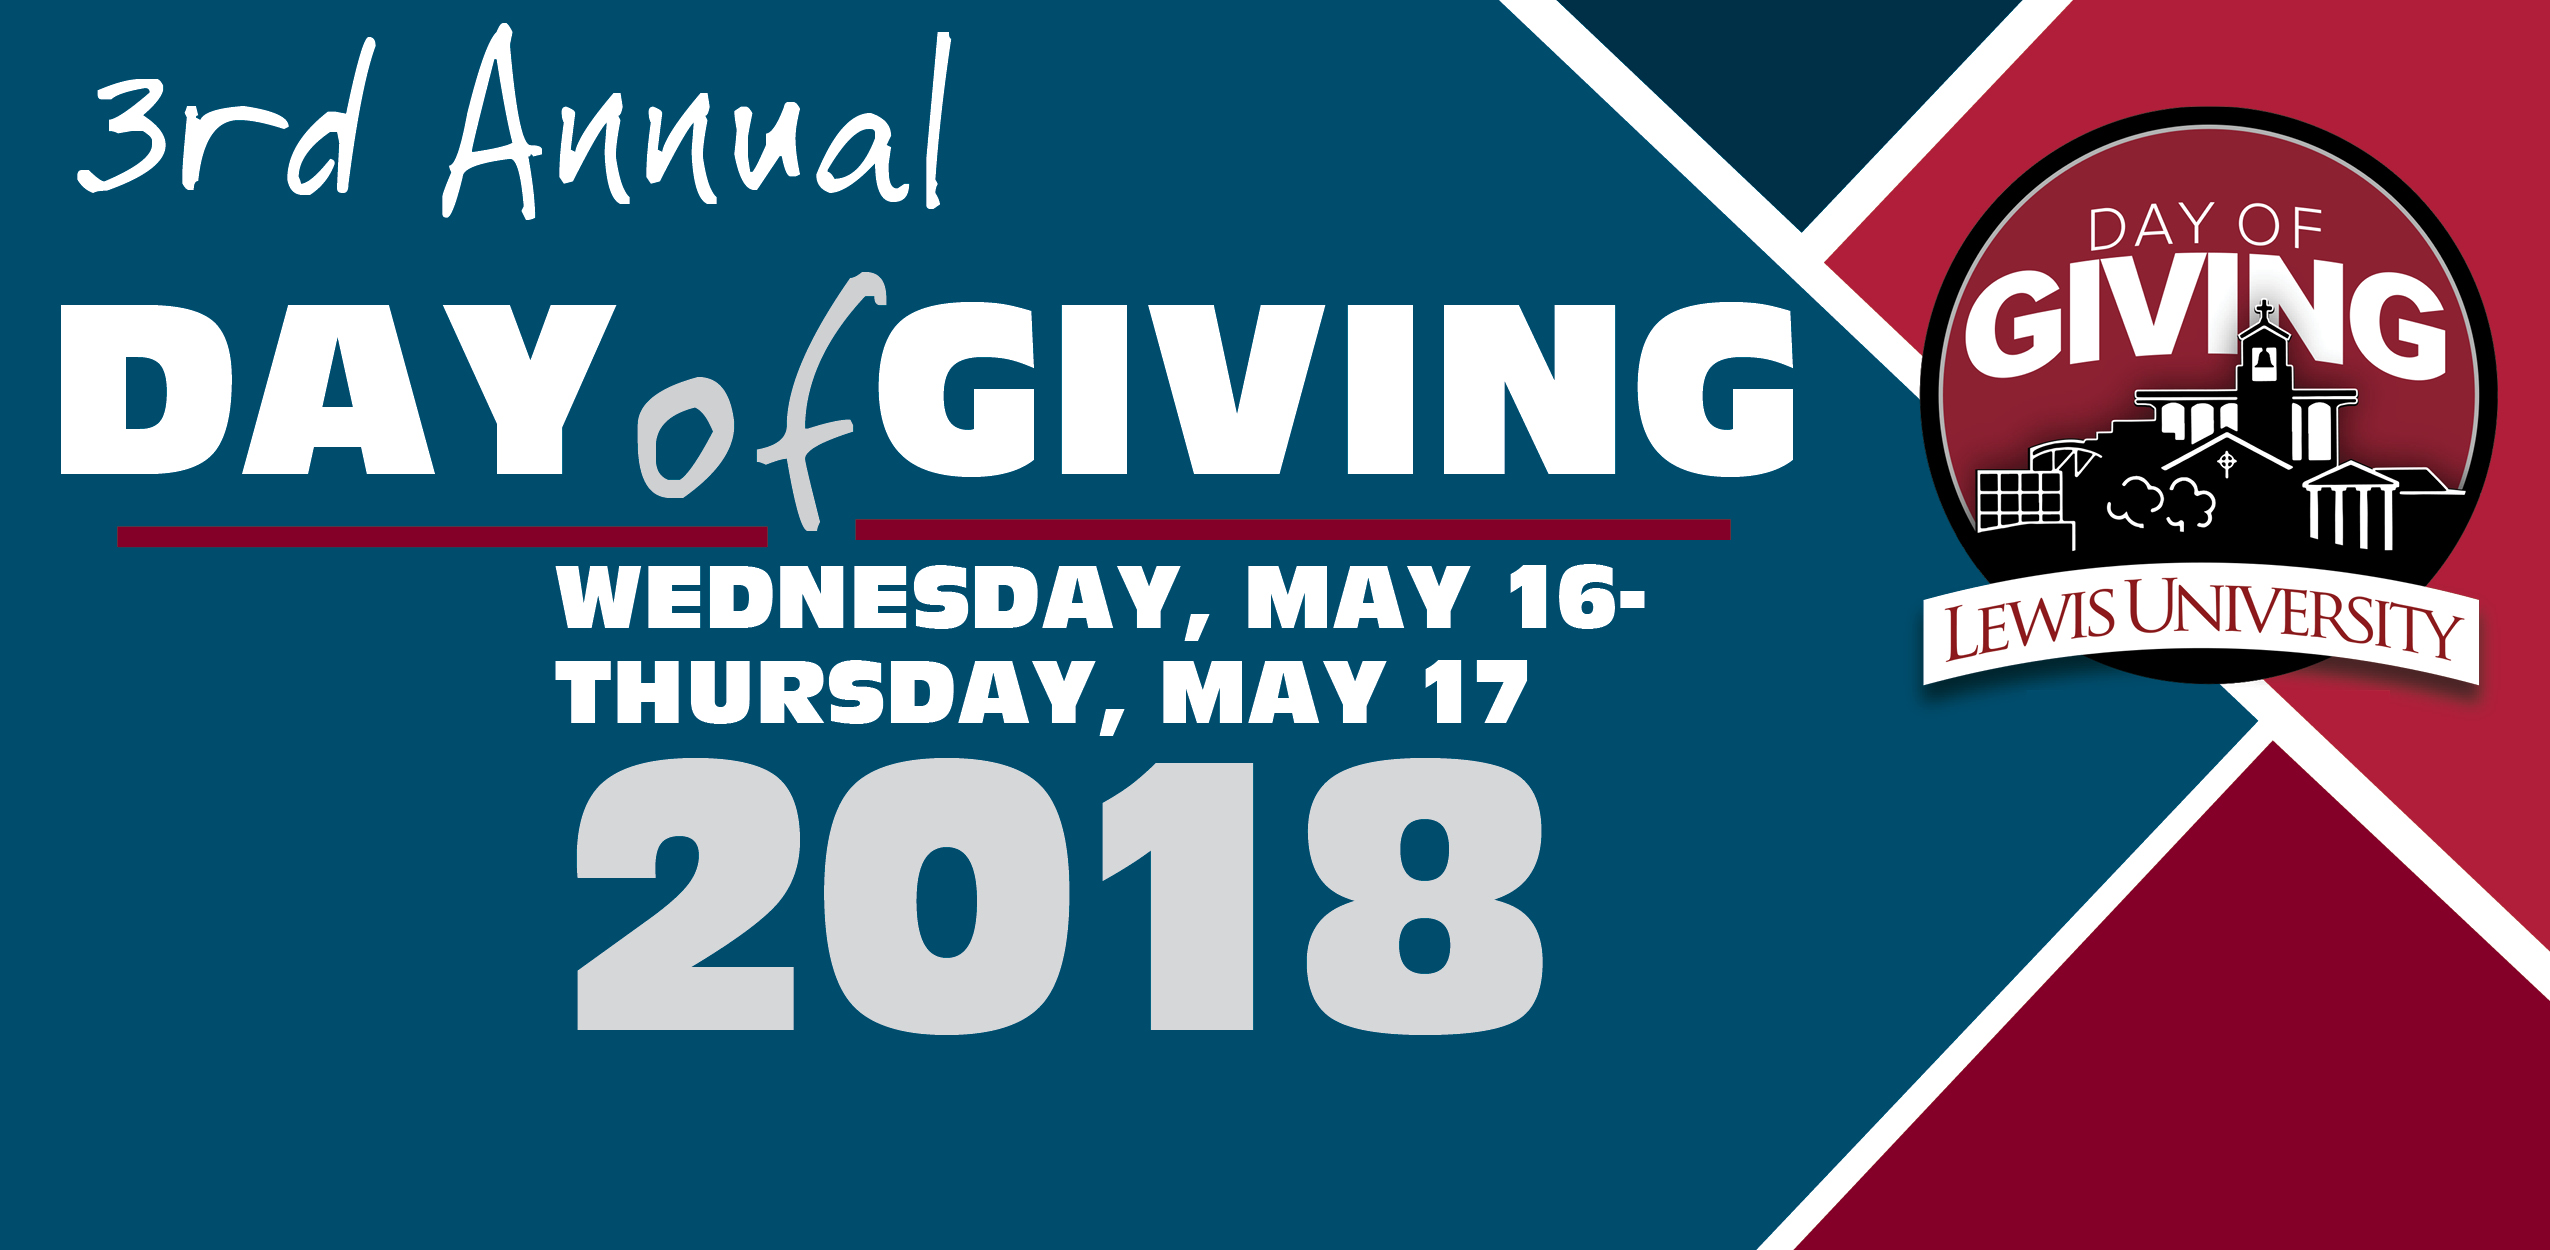 Day Of Giving - Make An Early Gift! - Lewis University - Alumni & Friends